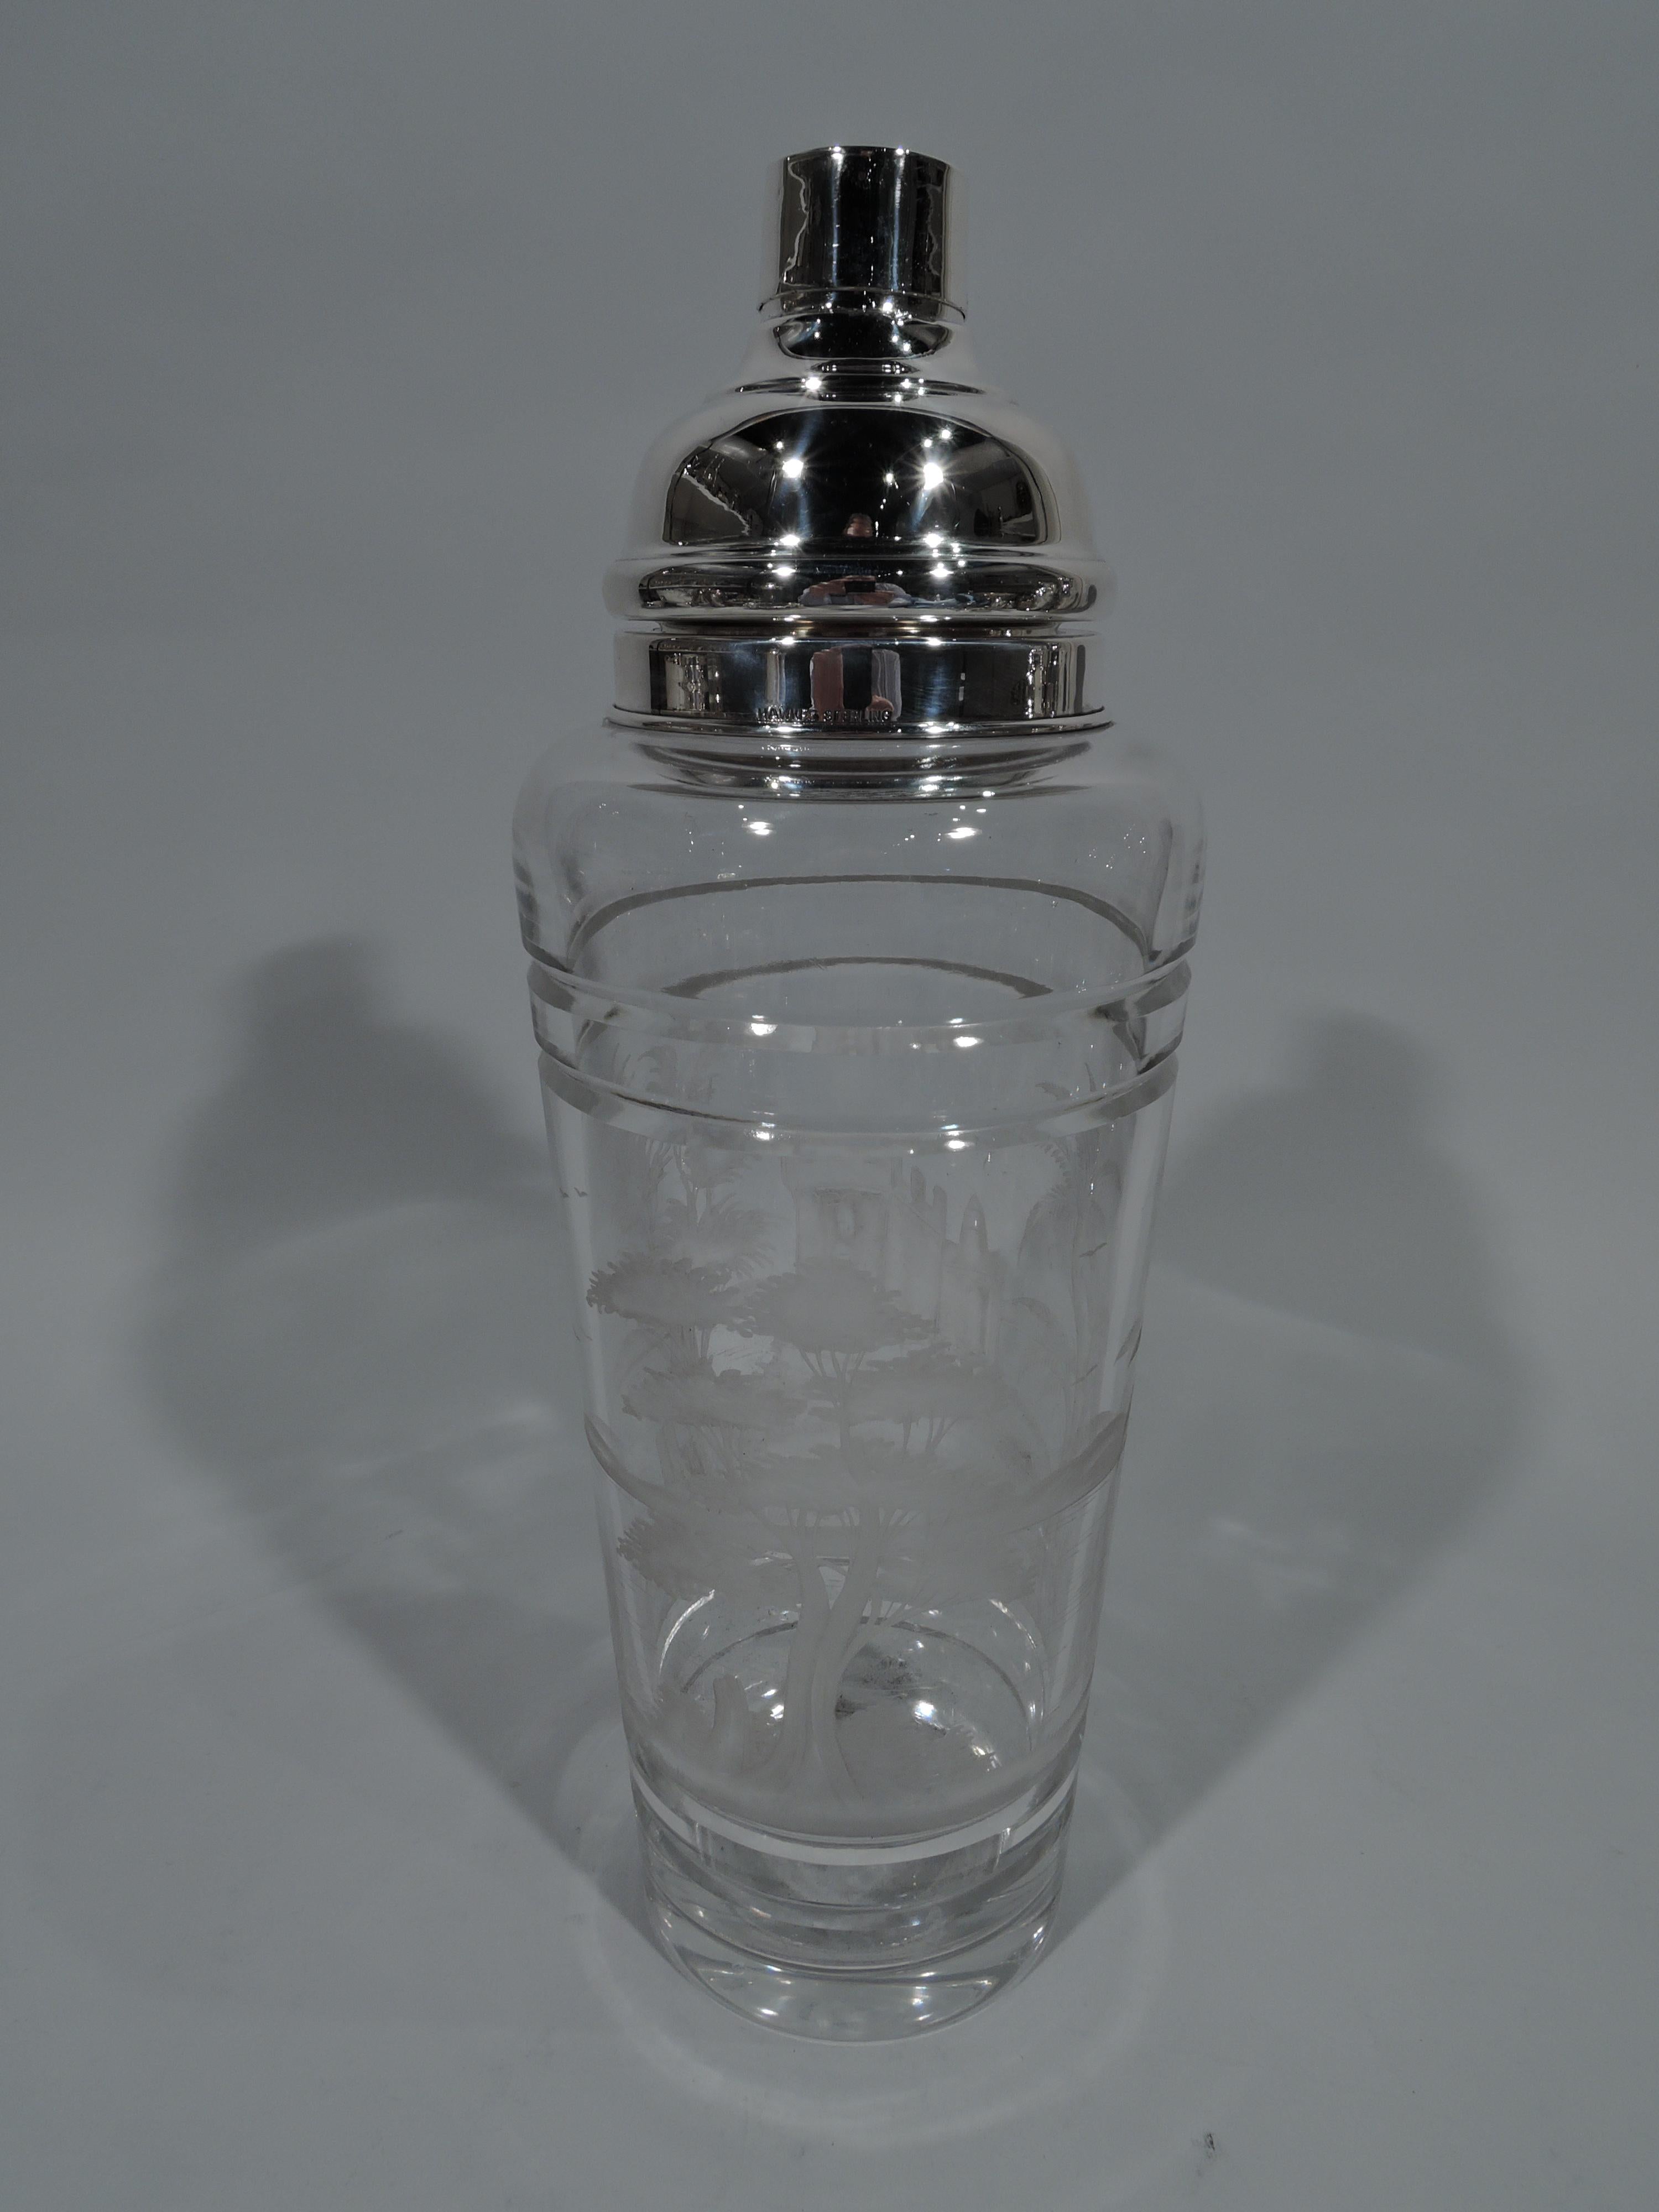 Large sterling silver and glass cocktail Shaker. Made by TG Hawkes & Co. in Corning, New York, circa 1920. Tapering glass cup with cut bands and acid-etched landscape depicting rippling water, trees, and castle. Short neck with sterling silver